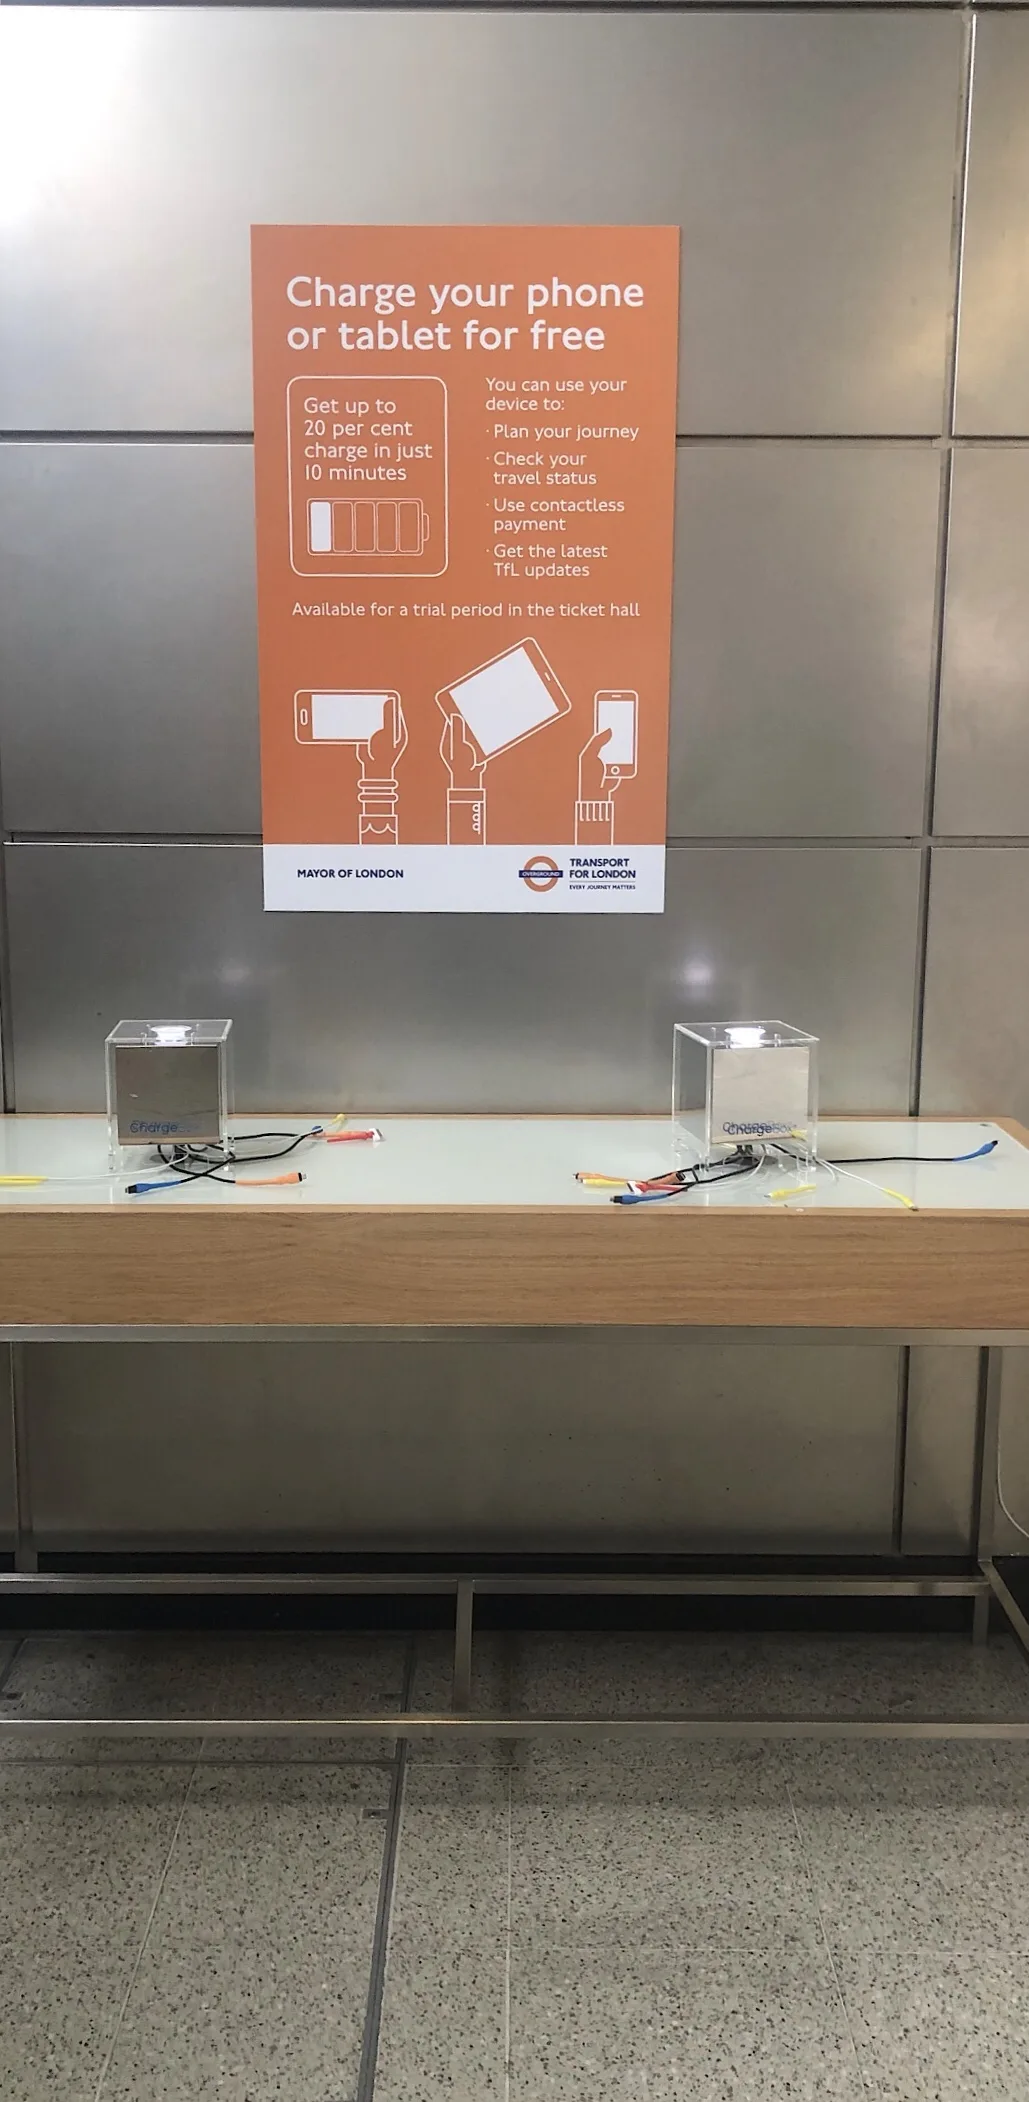 Free Phone Charging Trial at TFL Overground Stations